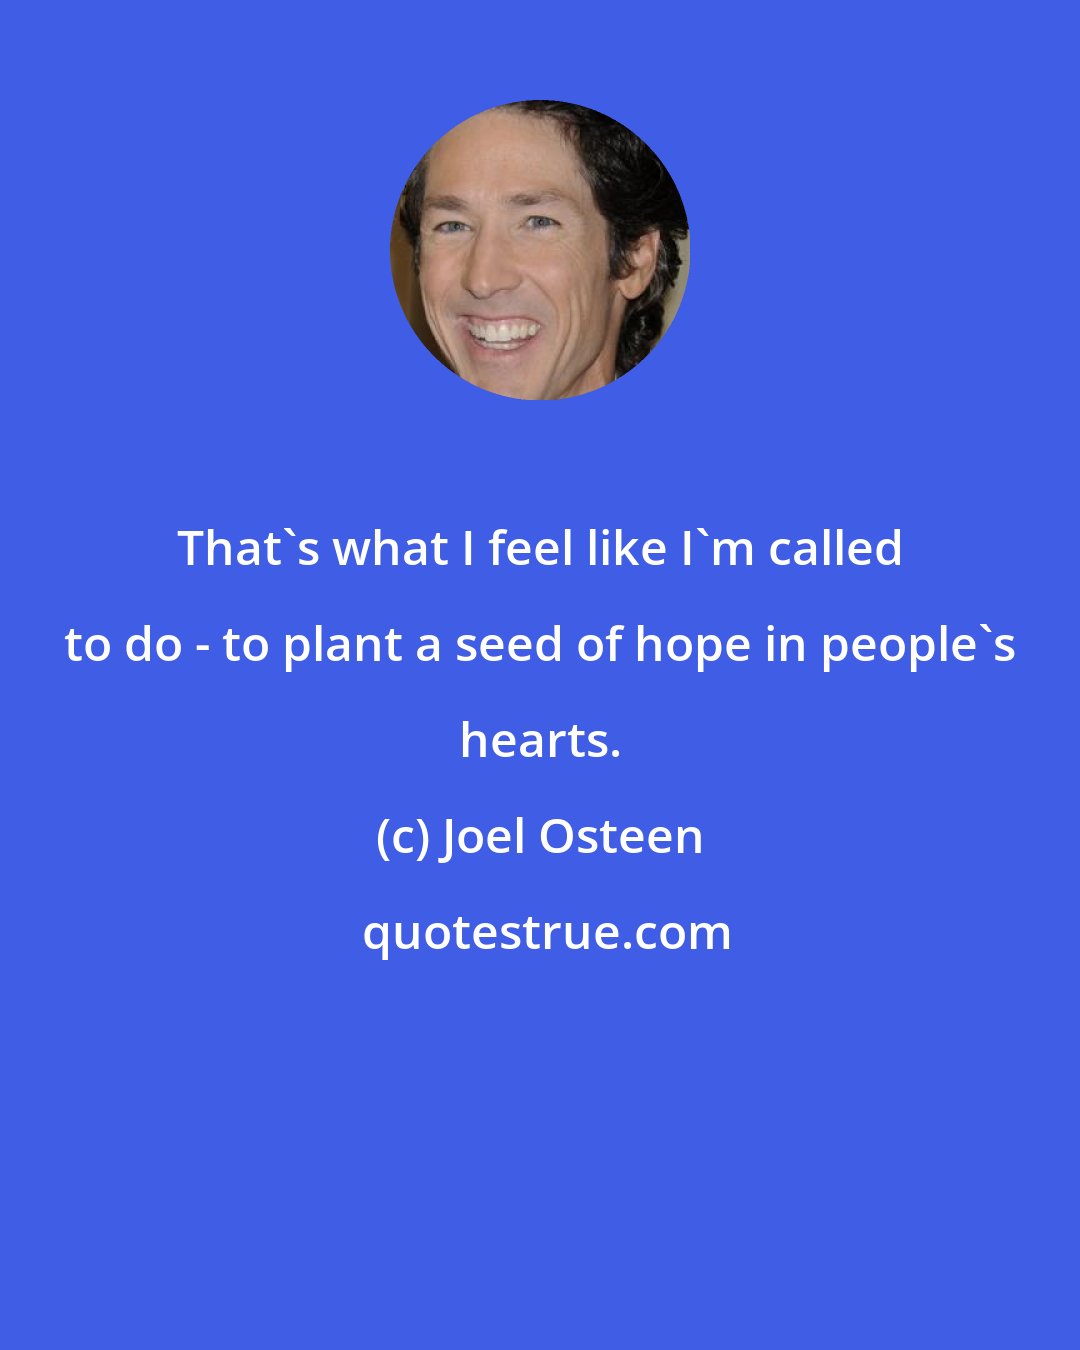 Joel Osteen: That's what I feel like I'm called to do - to plant a seed of hope in people's hearts.